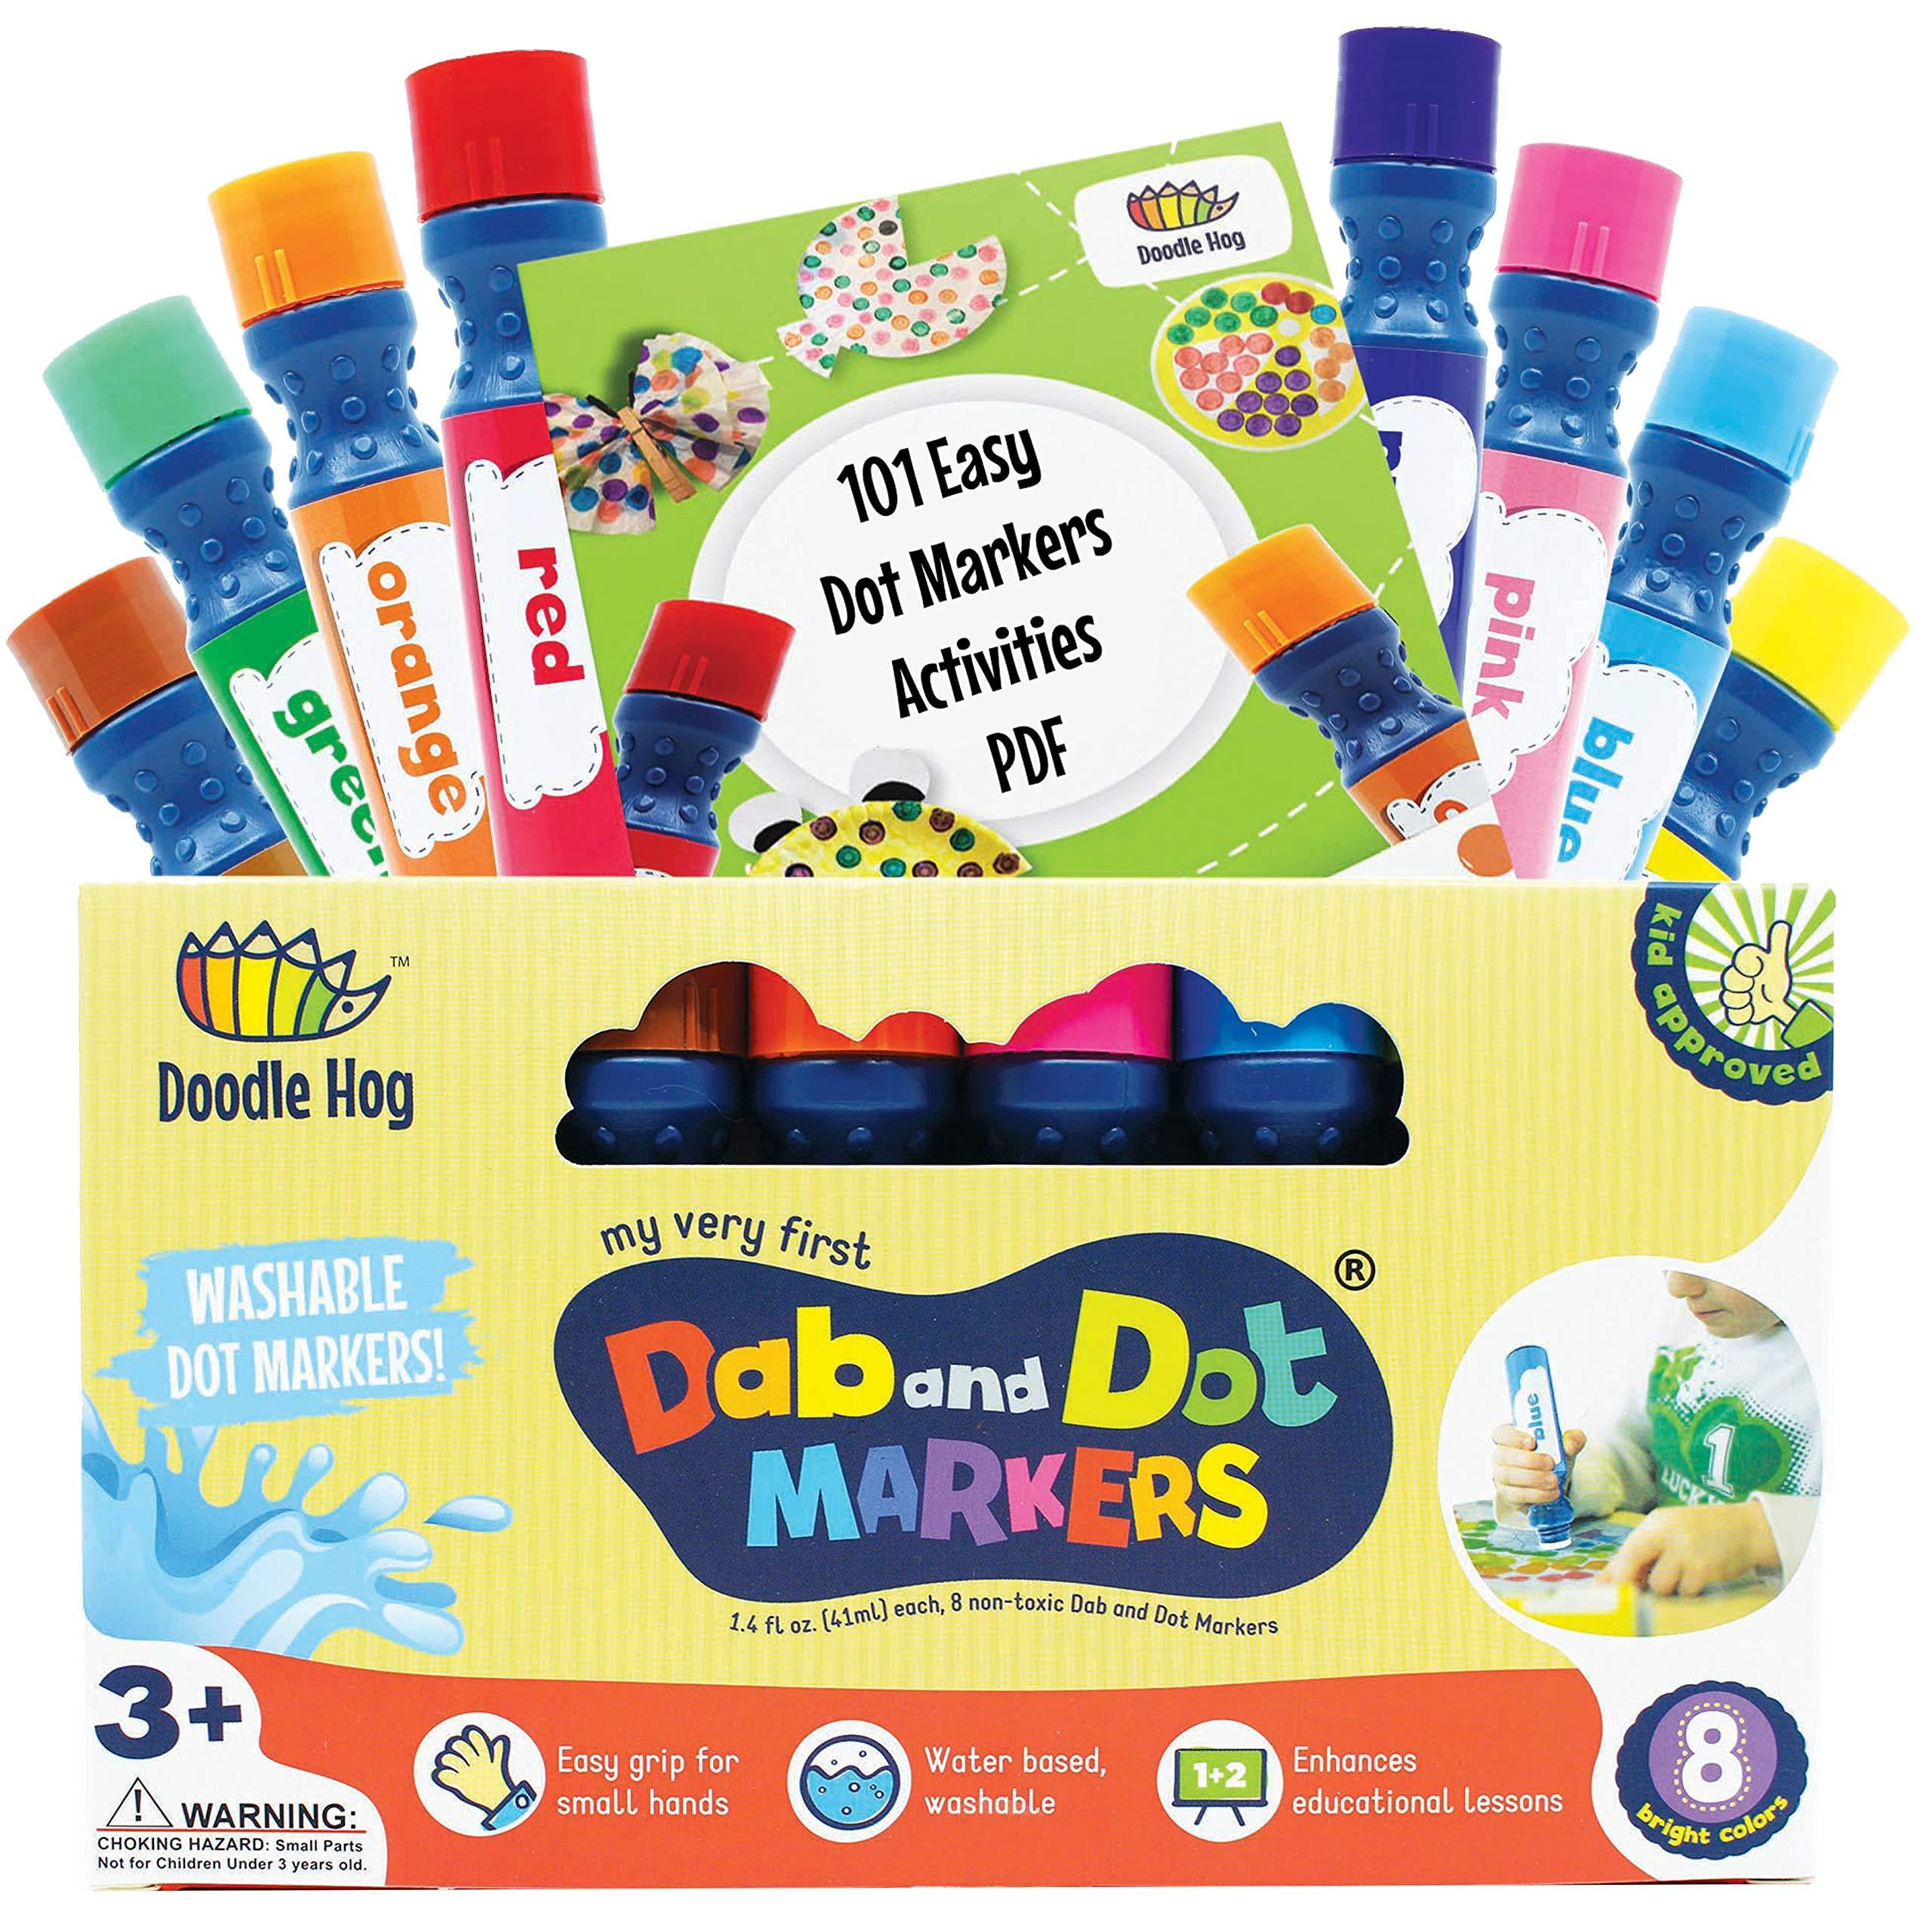 Dab and Dot Markers Incredible Value Dot Markers Class Pack in 36 Pack, School and Class Supplies of Dabbers, Daubers, Washable Art Markers in